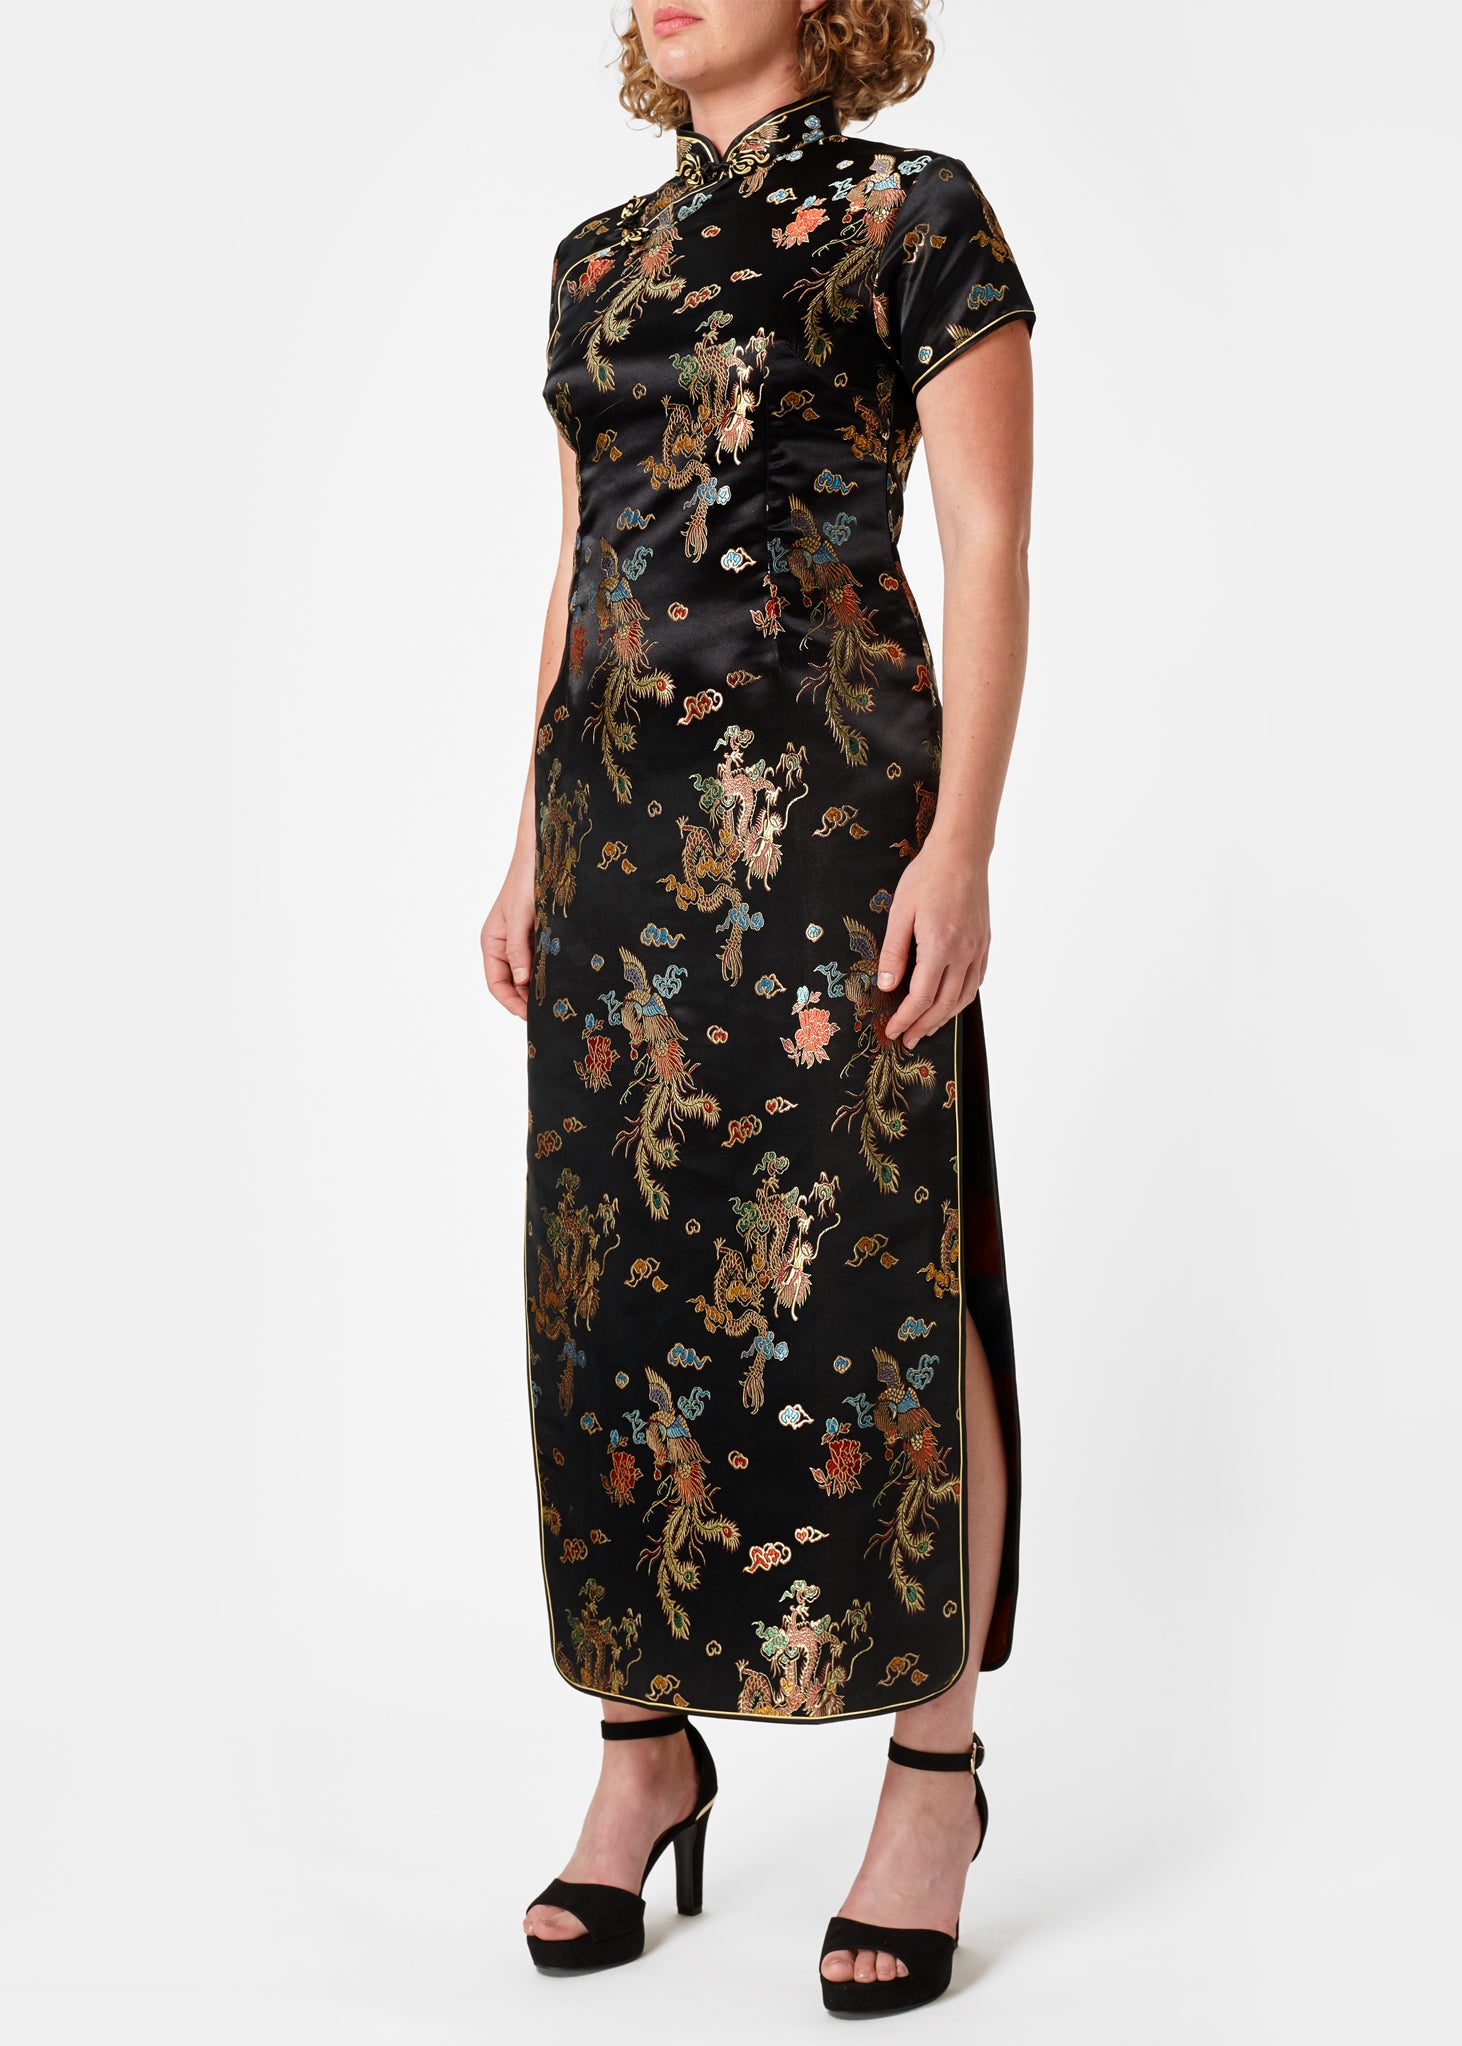 The Cheongsam or Qipao, is a feminine body-hugging dress with distinctive Chinese features of mandarin collar, side splits and hand stitched flower and knot frog fastenings. Manufactured in authentic high quality silk/rayon brocade in a sophisticated black dragon and phoenix design - a symbol of success and prosperity 